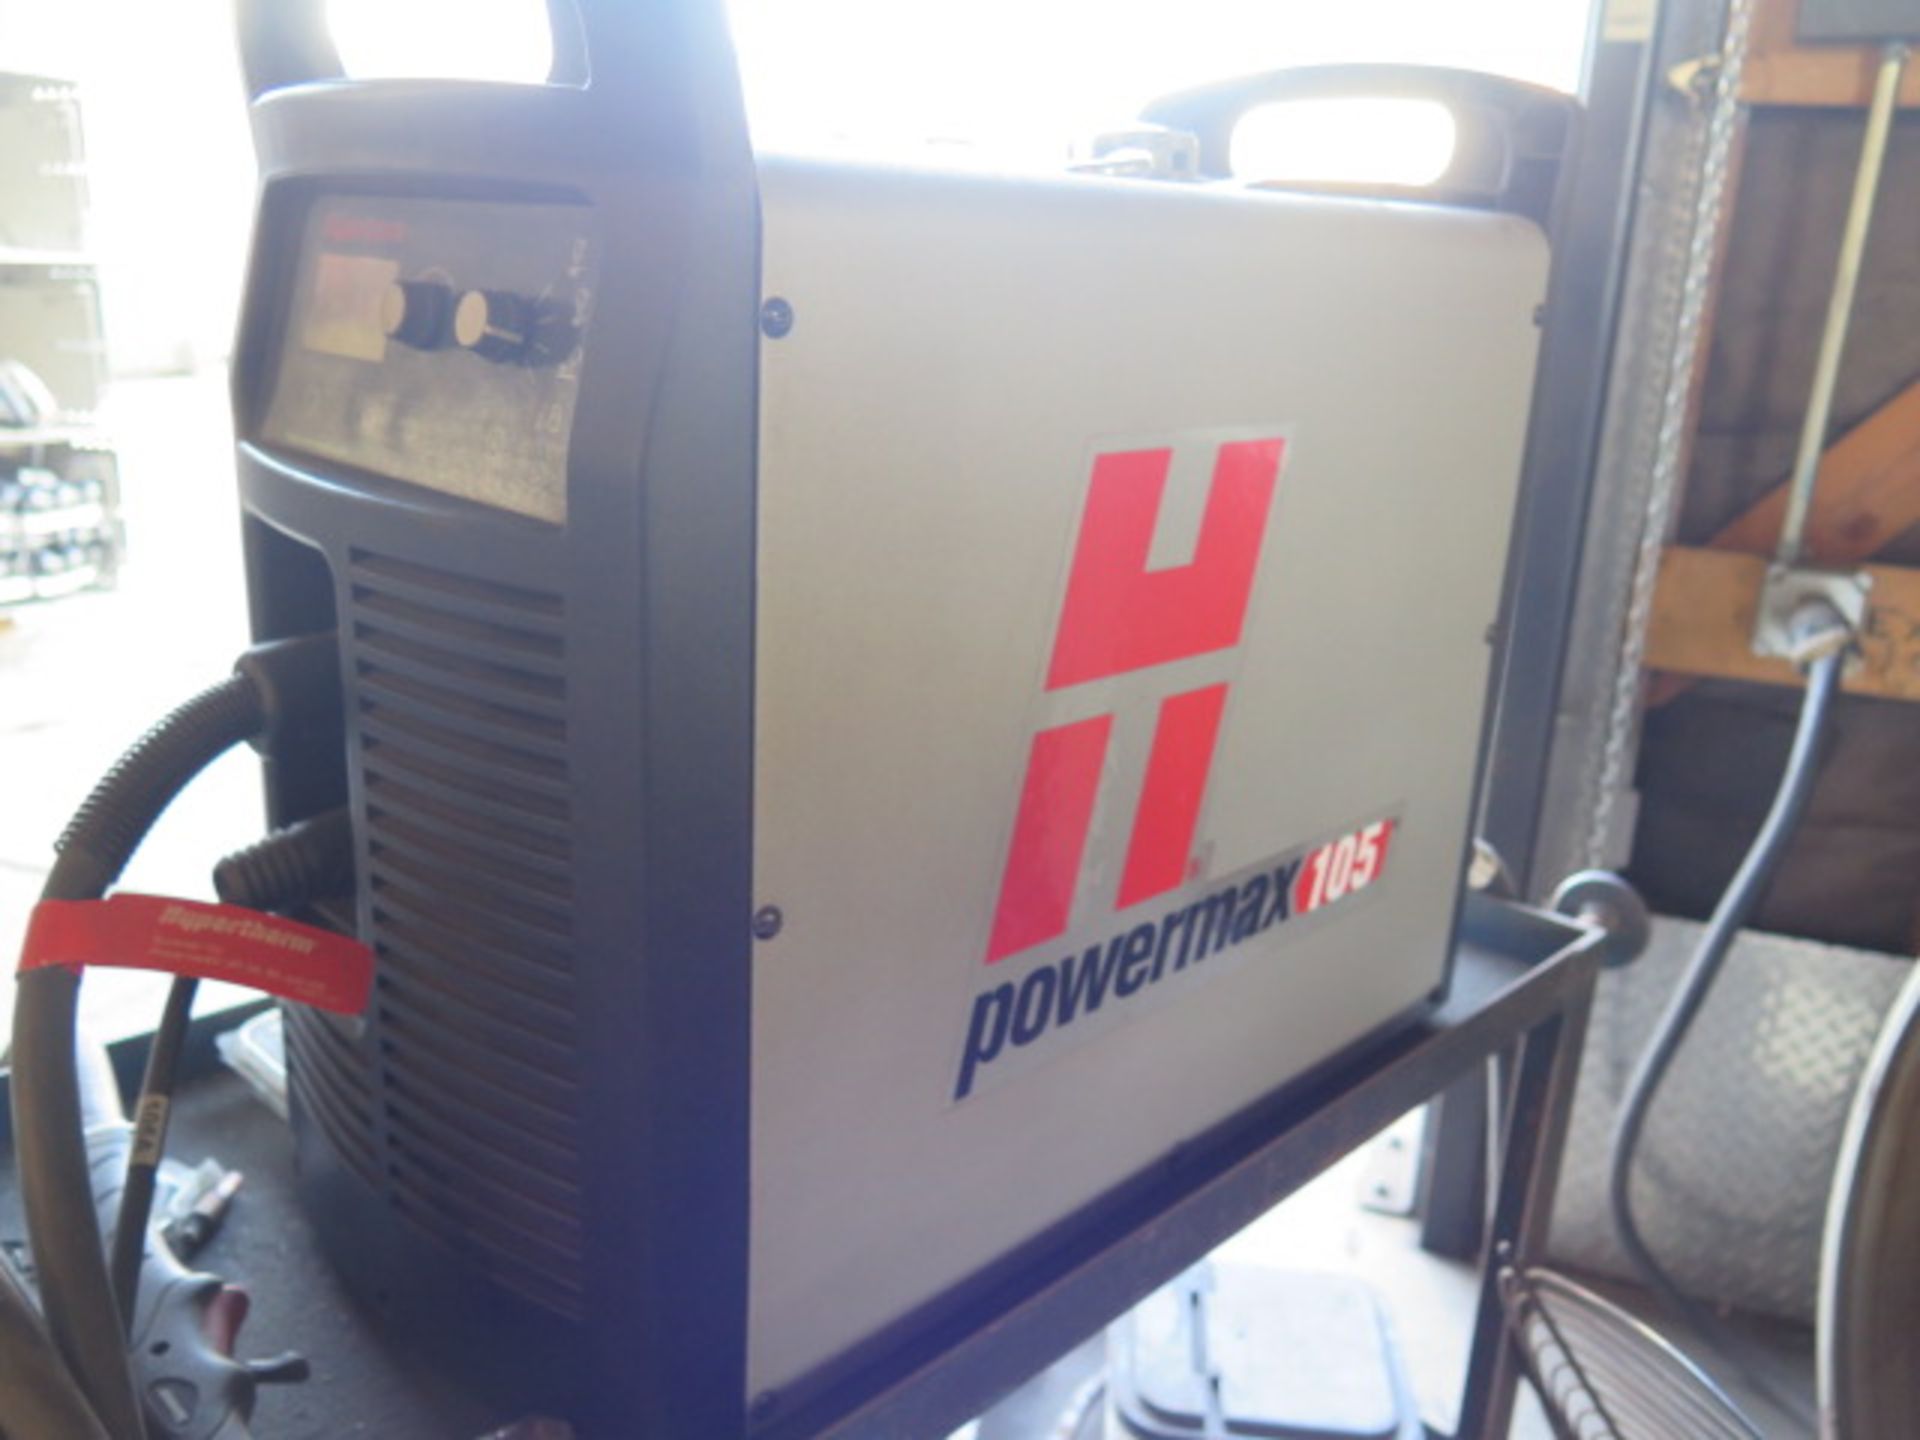 Hypertherm Powermax 105 Plasma Cutting Power Source s/n 105-027361 (SOLD AS-IS - NO WARRANTY) - Image 3 of 7